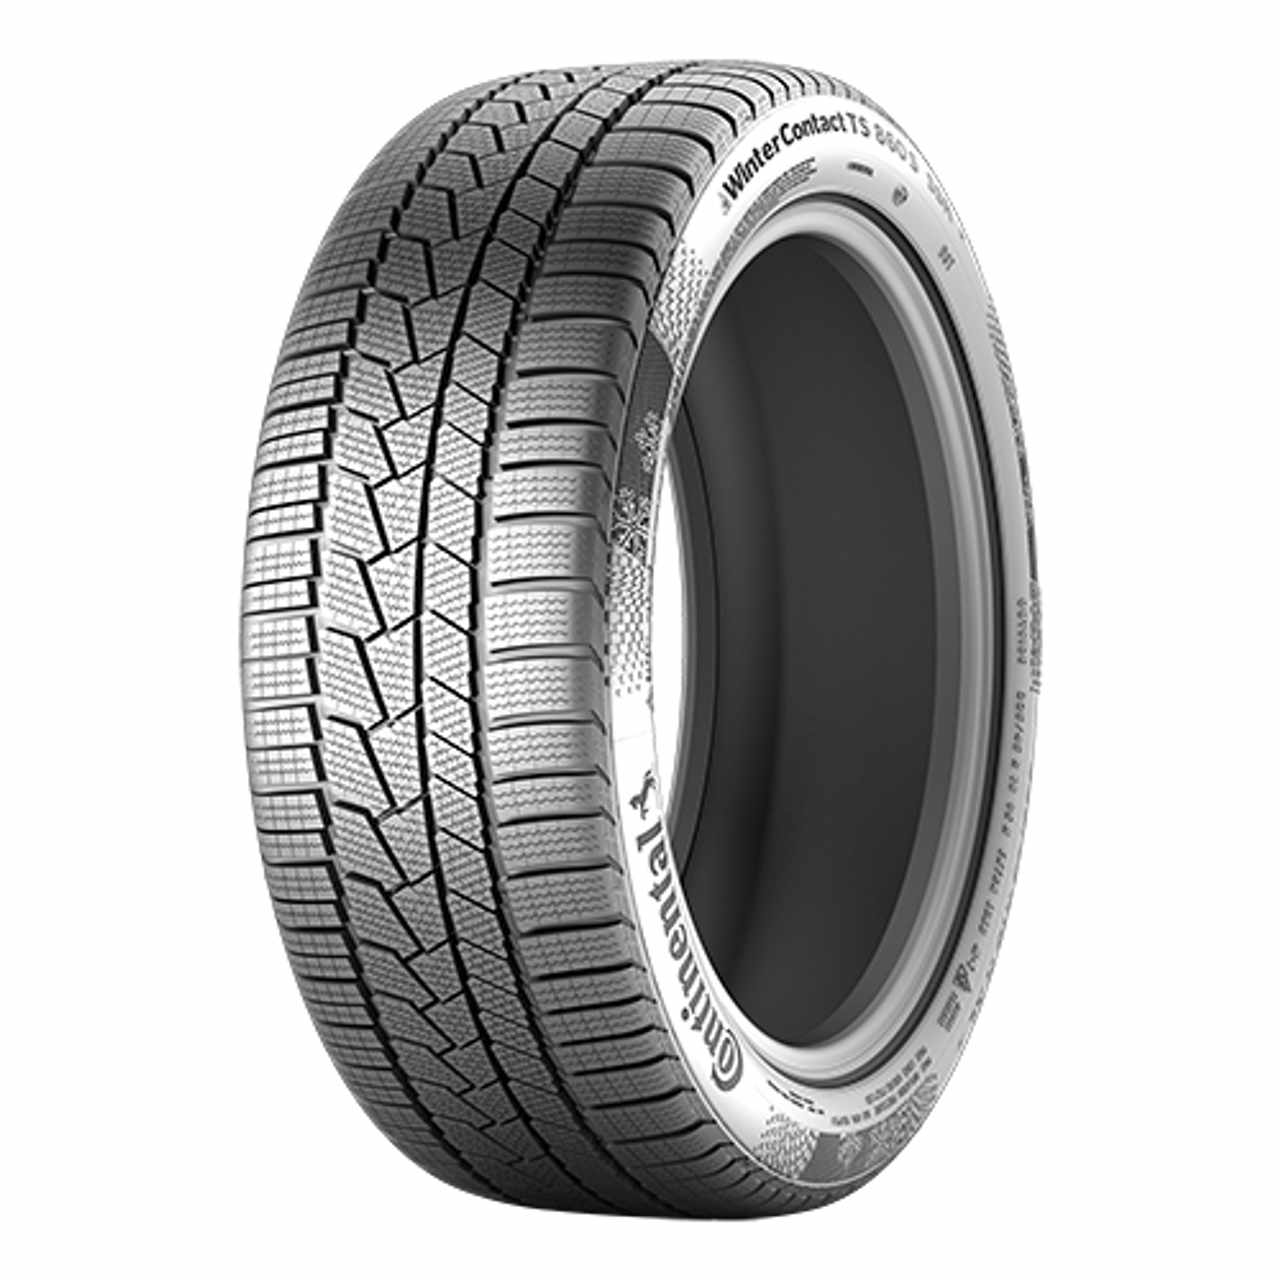 CONTINENTAL WINTERCONTACT TS 860 S 255/35R19 96V FR BSW